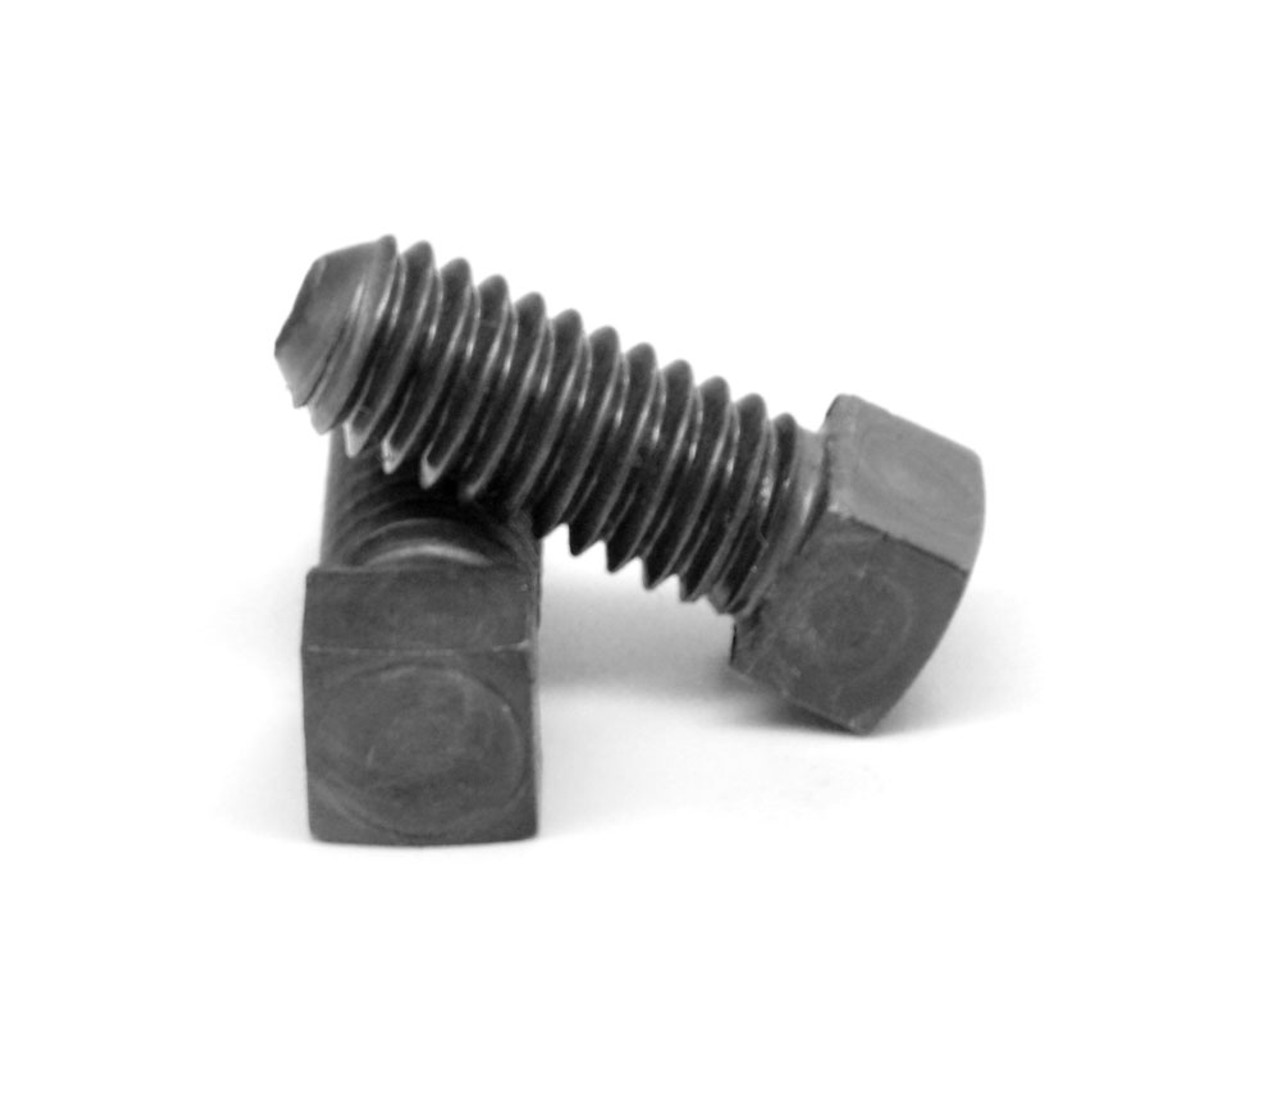 3/8"-16 x 2 1/2" (FT) Coarse Thread Square Head Set Screw Cone Point Low Carbon Steel Case Hardened Plain Finish